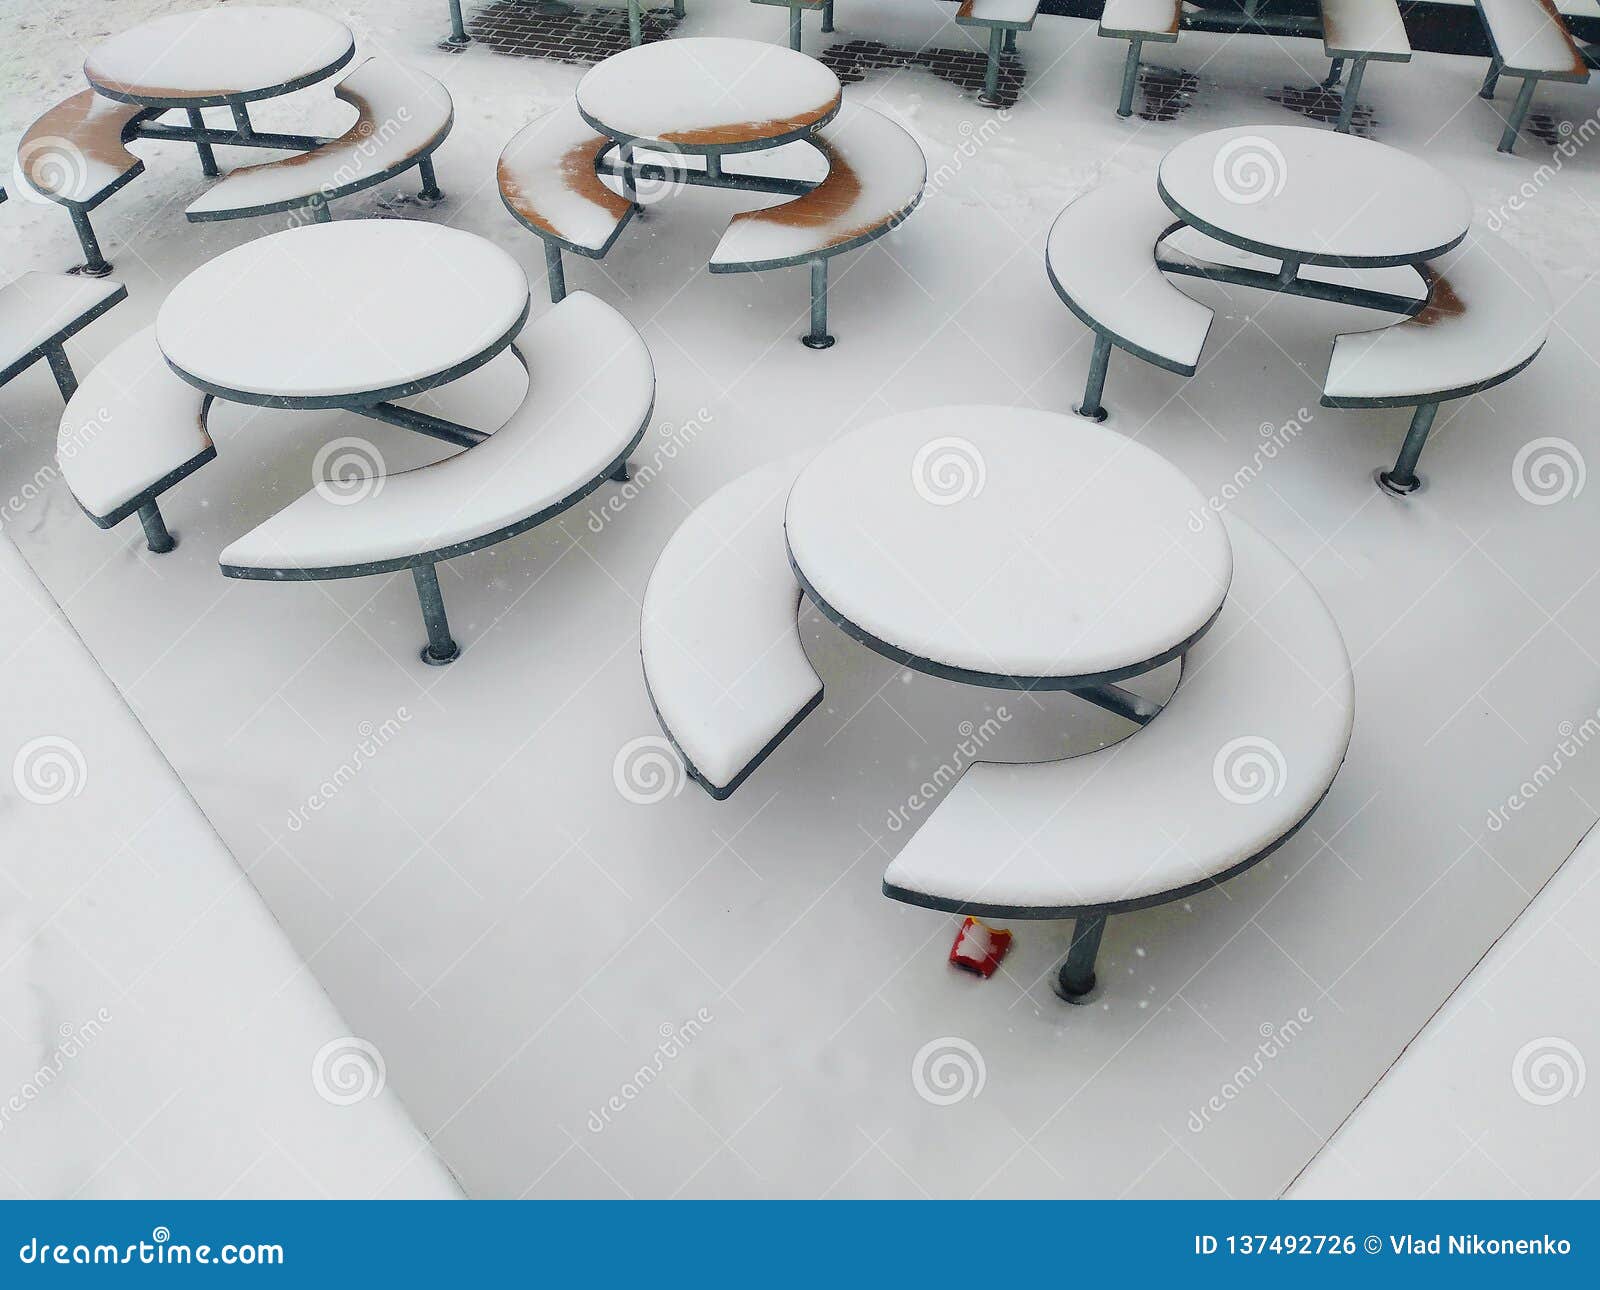 mcdonalds tables in the snow in the city of kiev